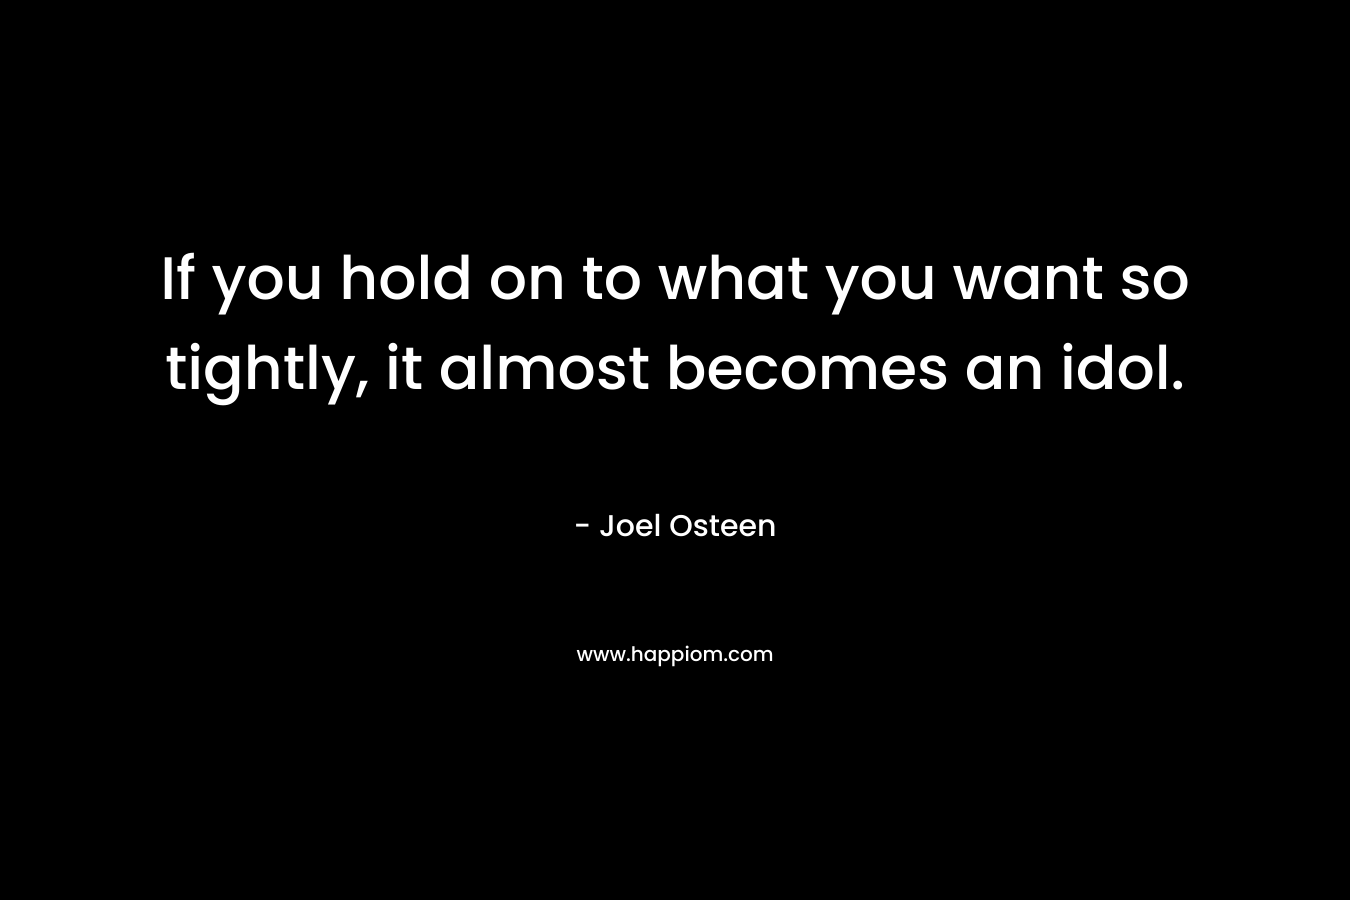 If you hold on to what you want so tightly, it almost becomes an idol.